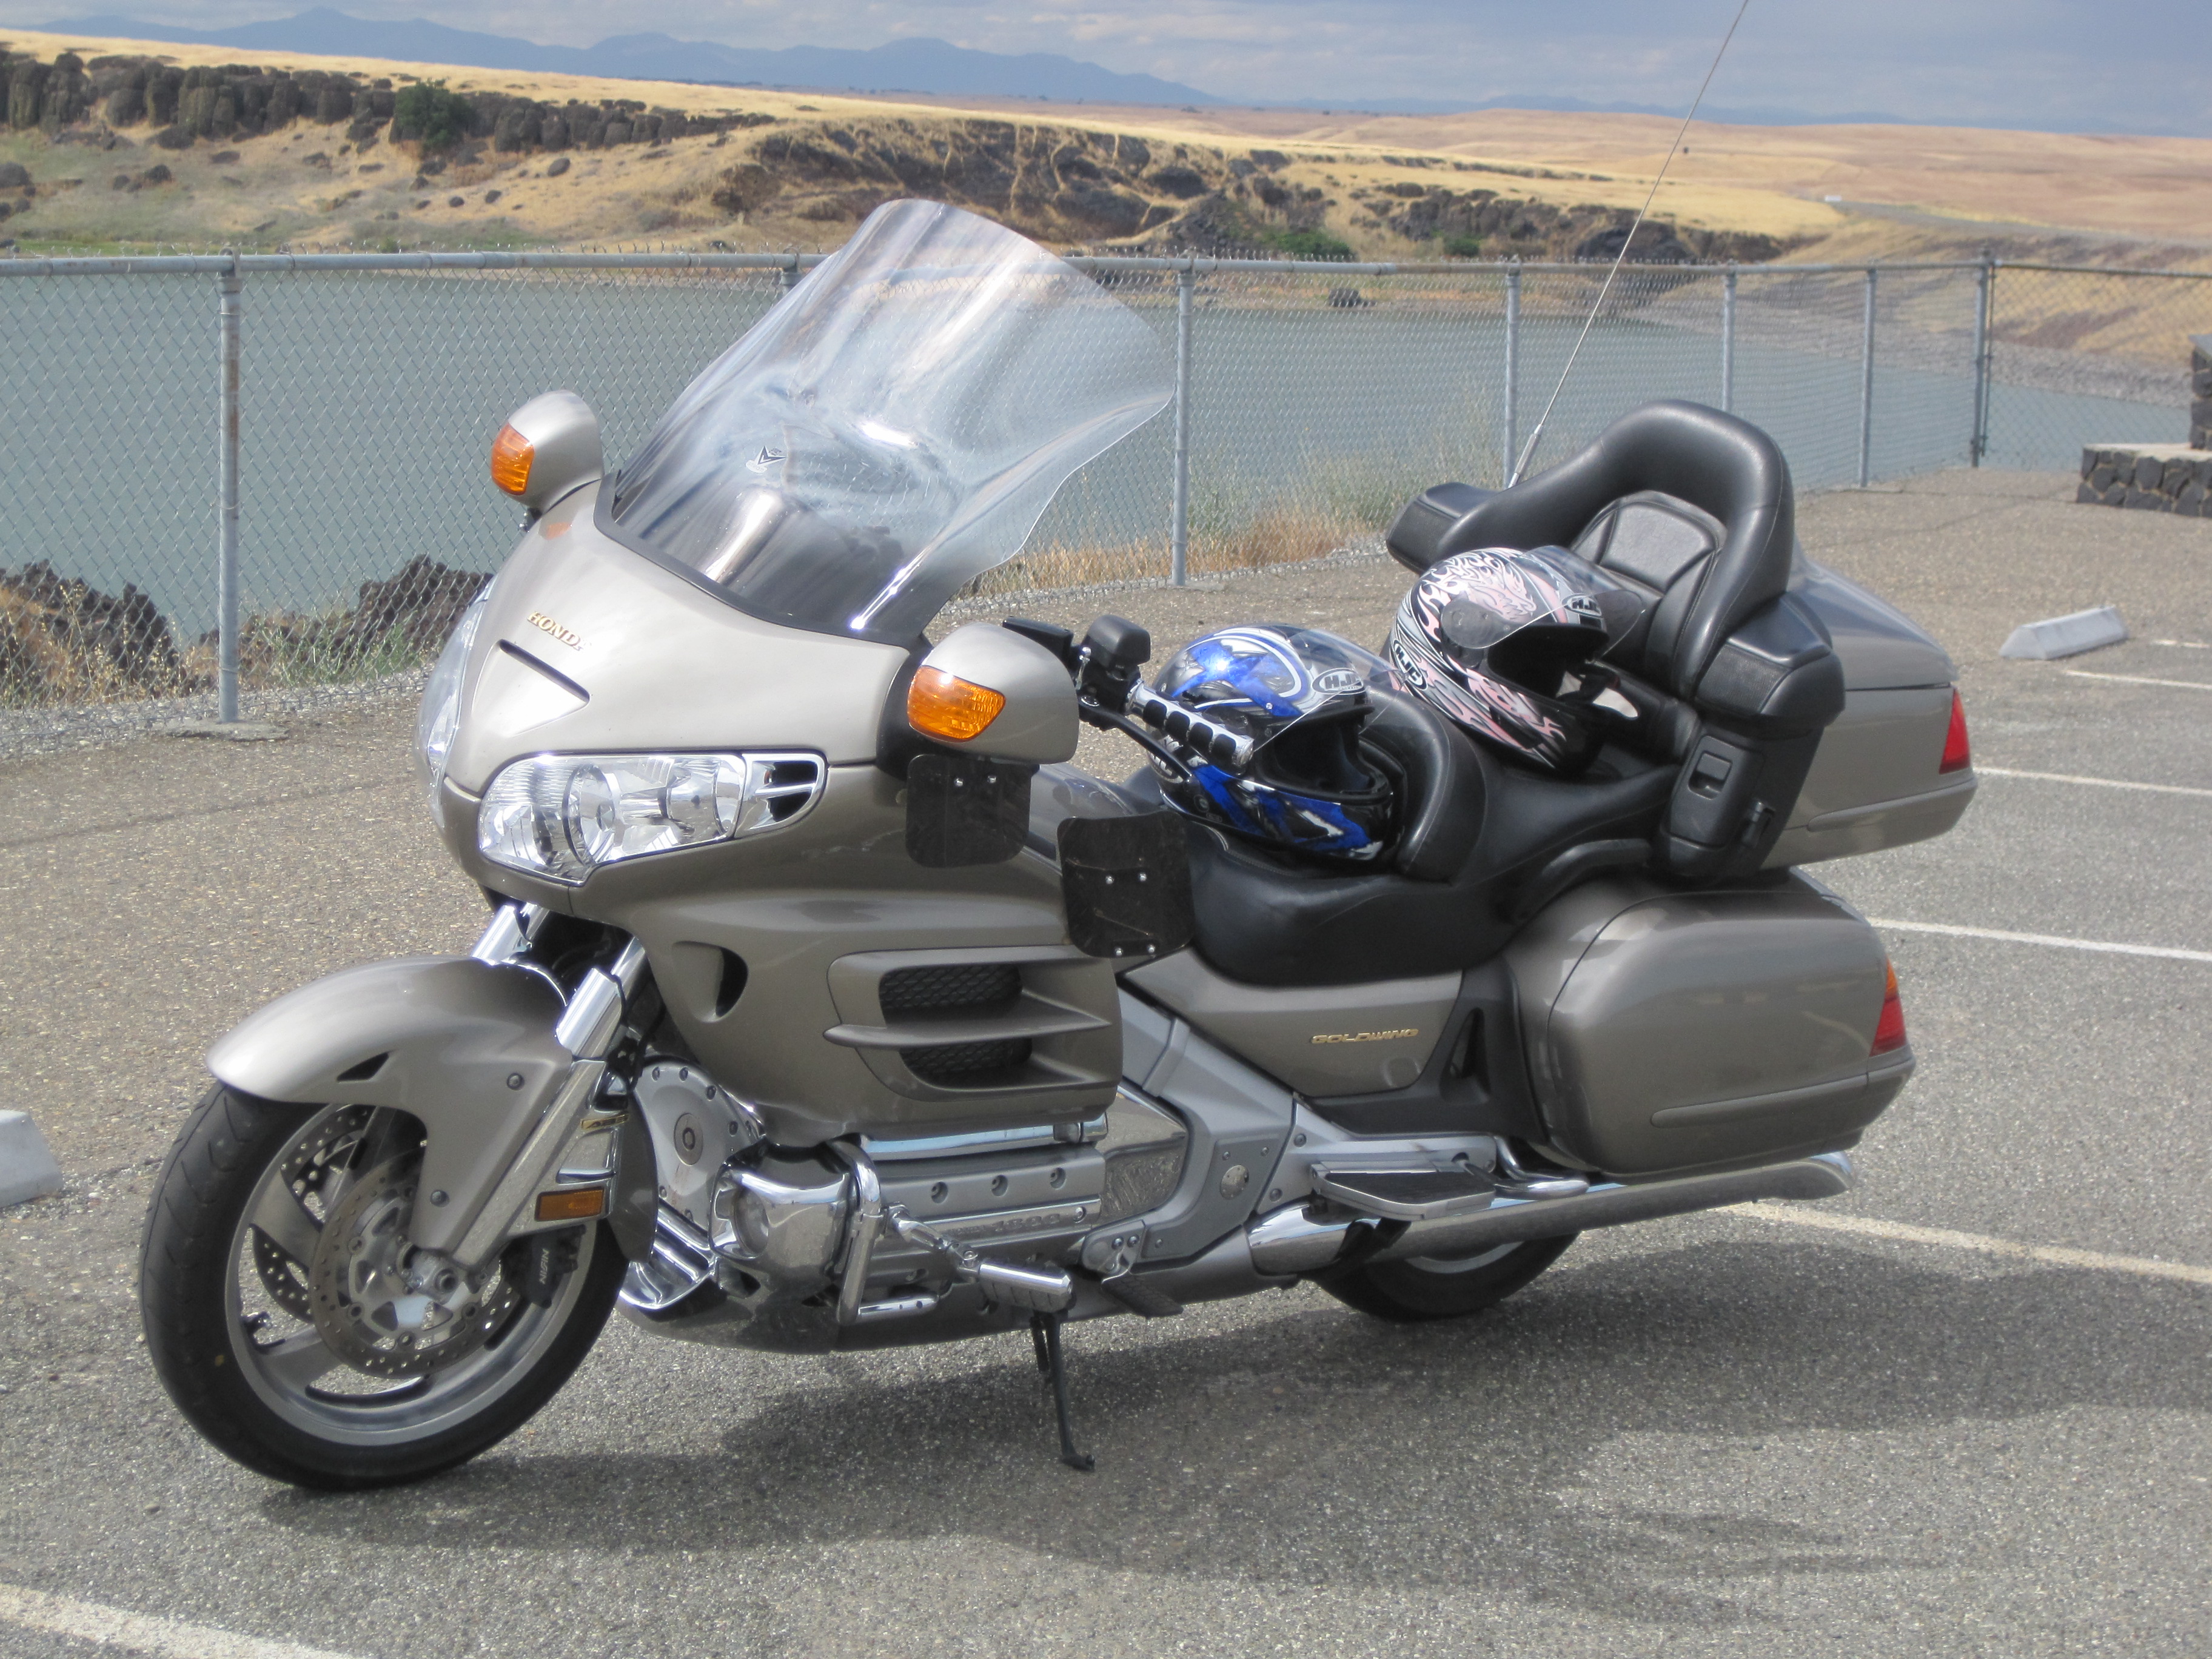 New (to us) Goldwing gl1800